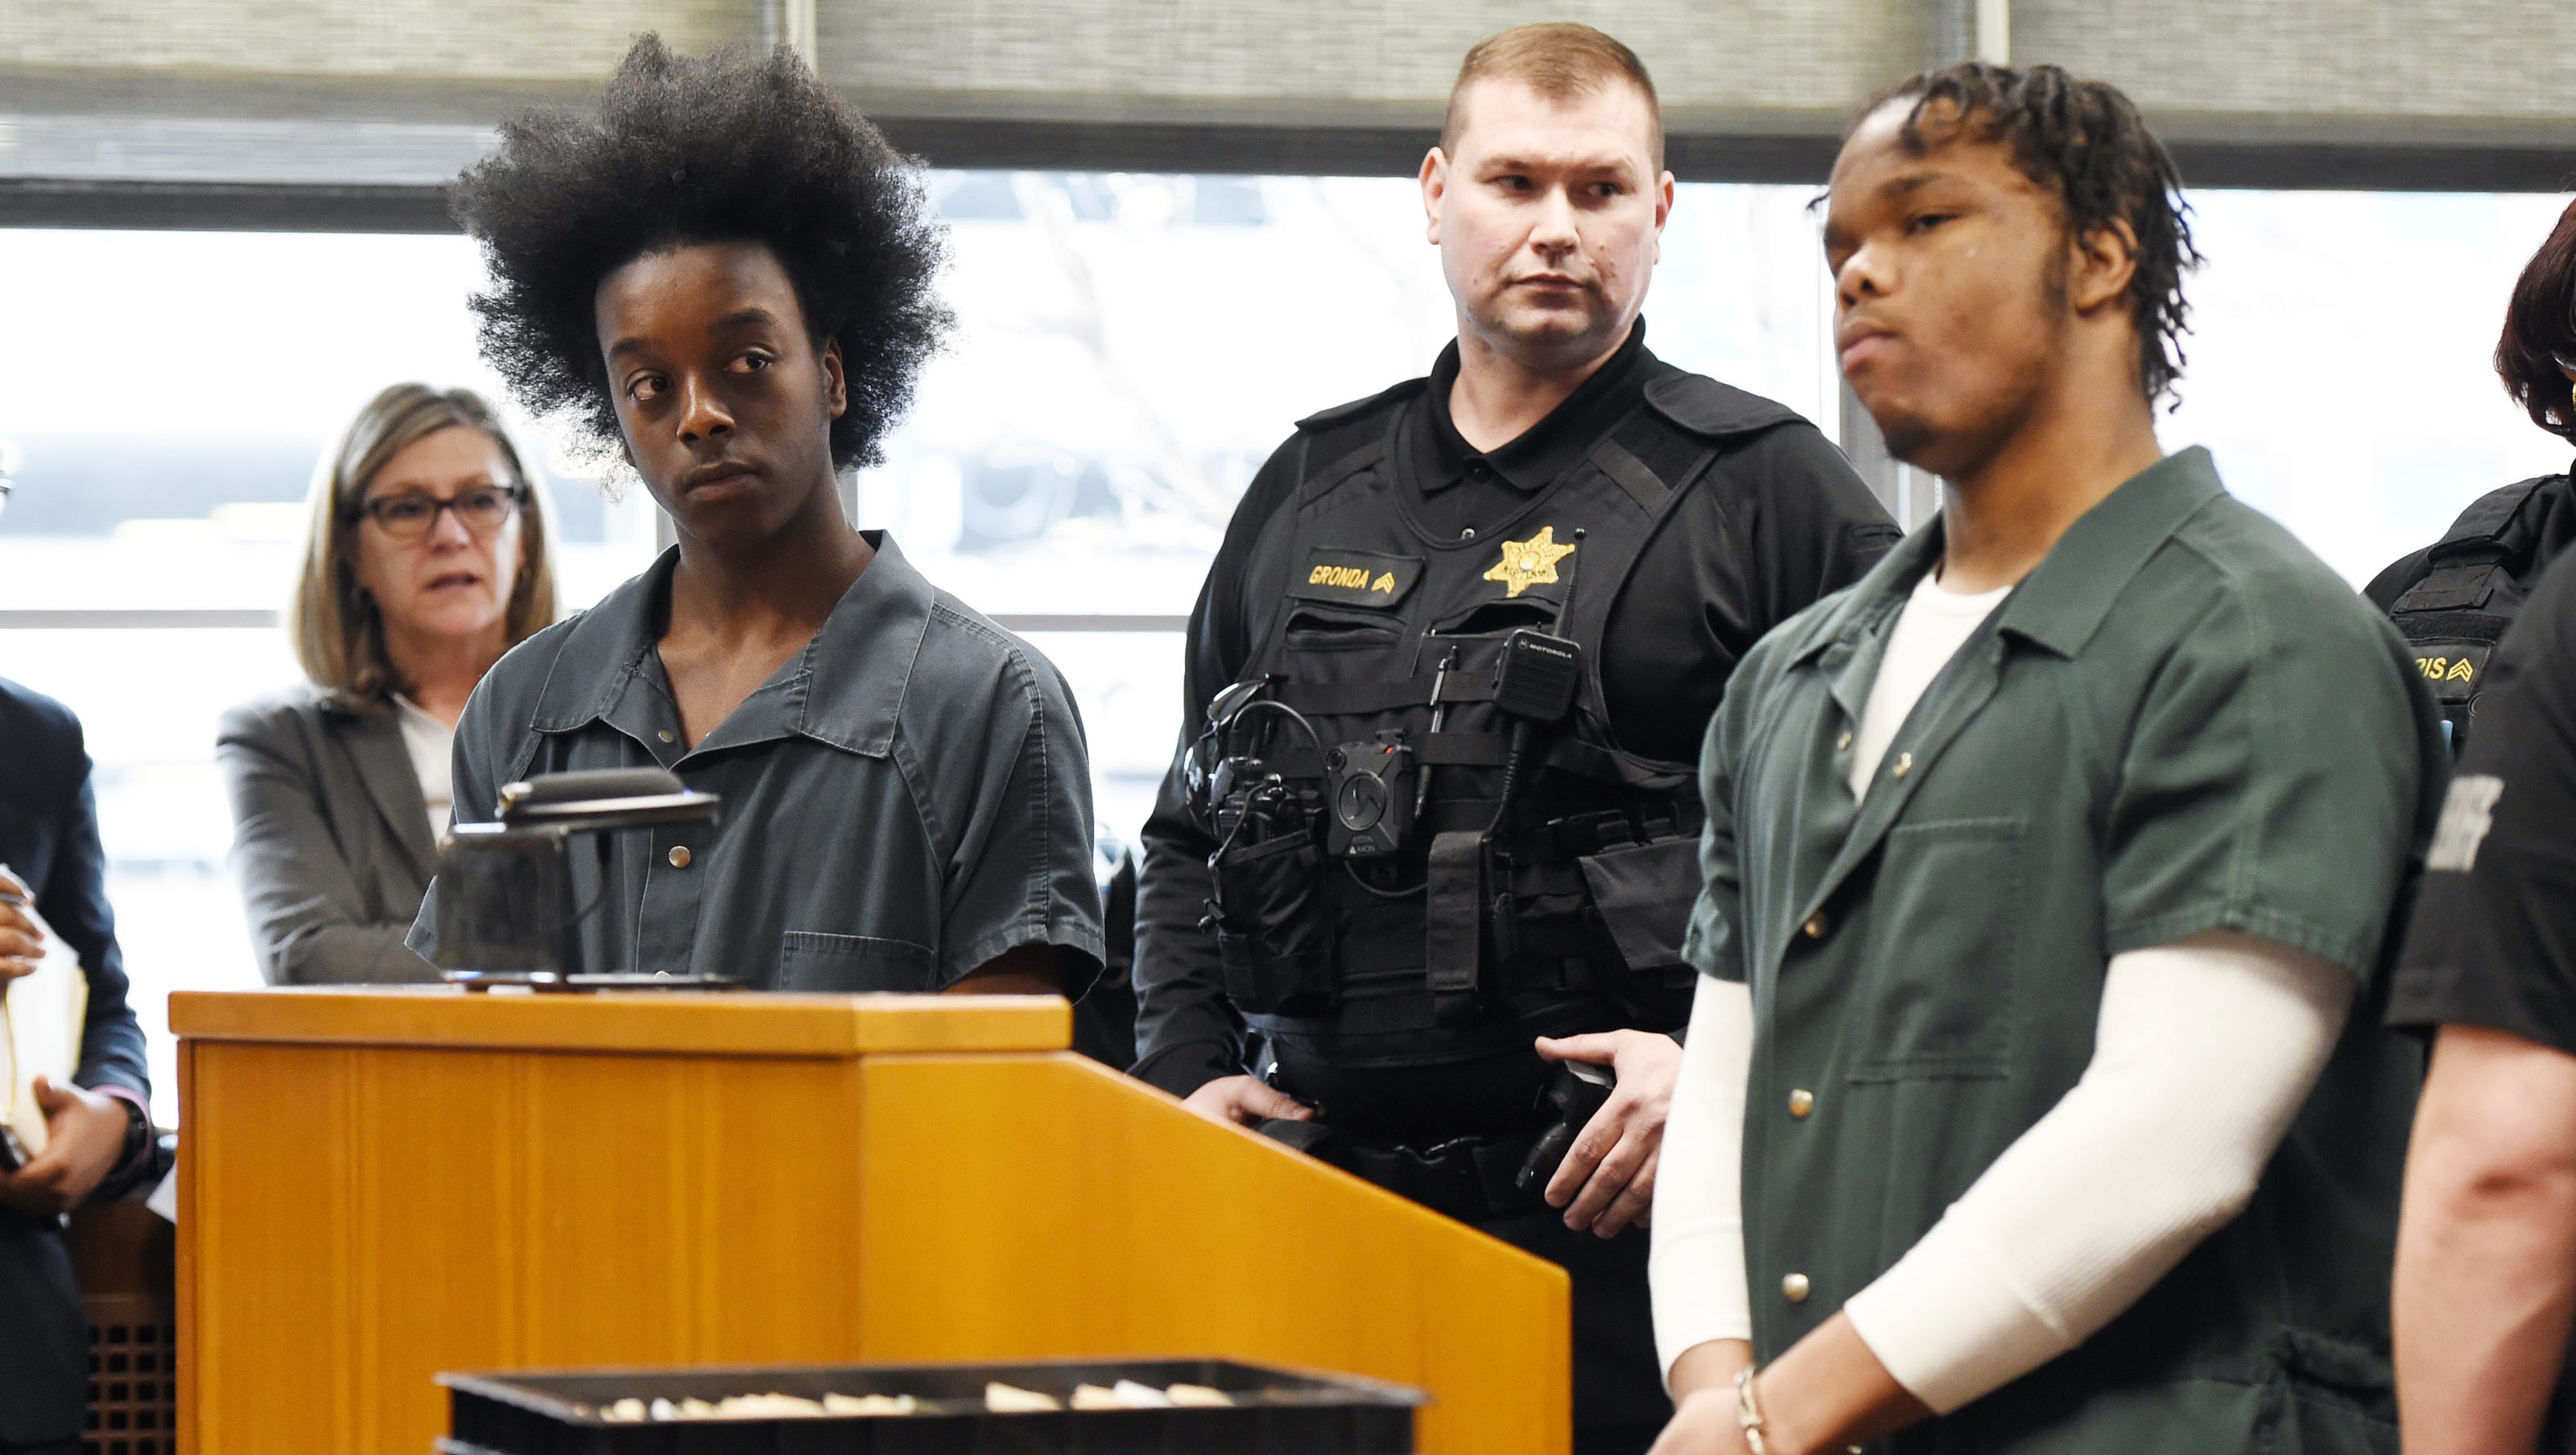 2 sentenced in 2016 fatal shooting student robbery attempt